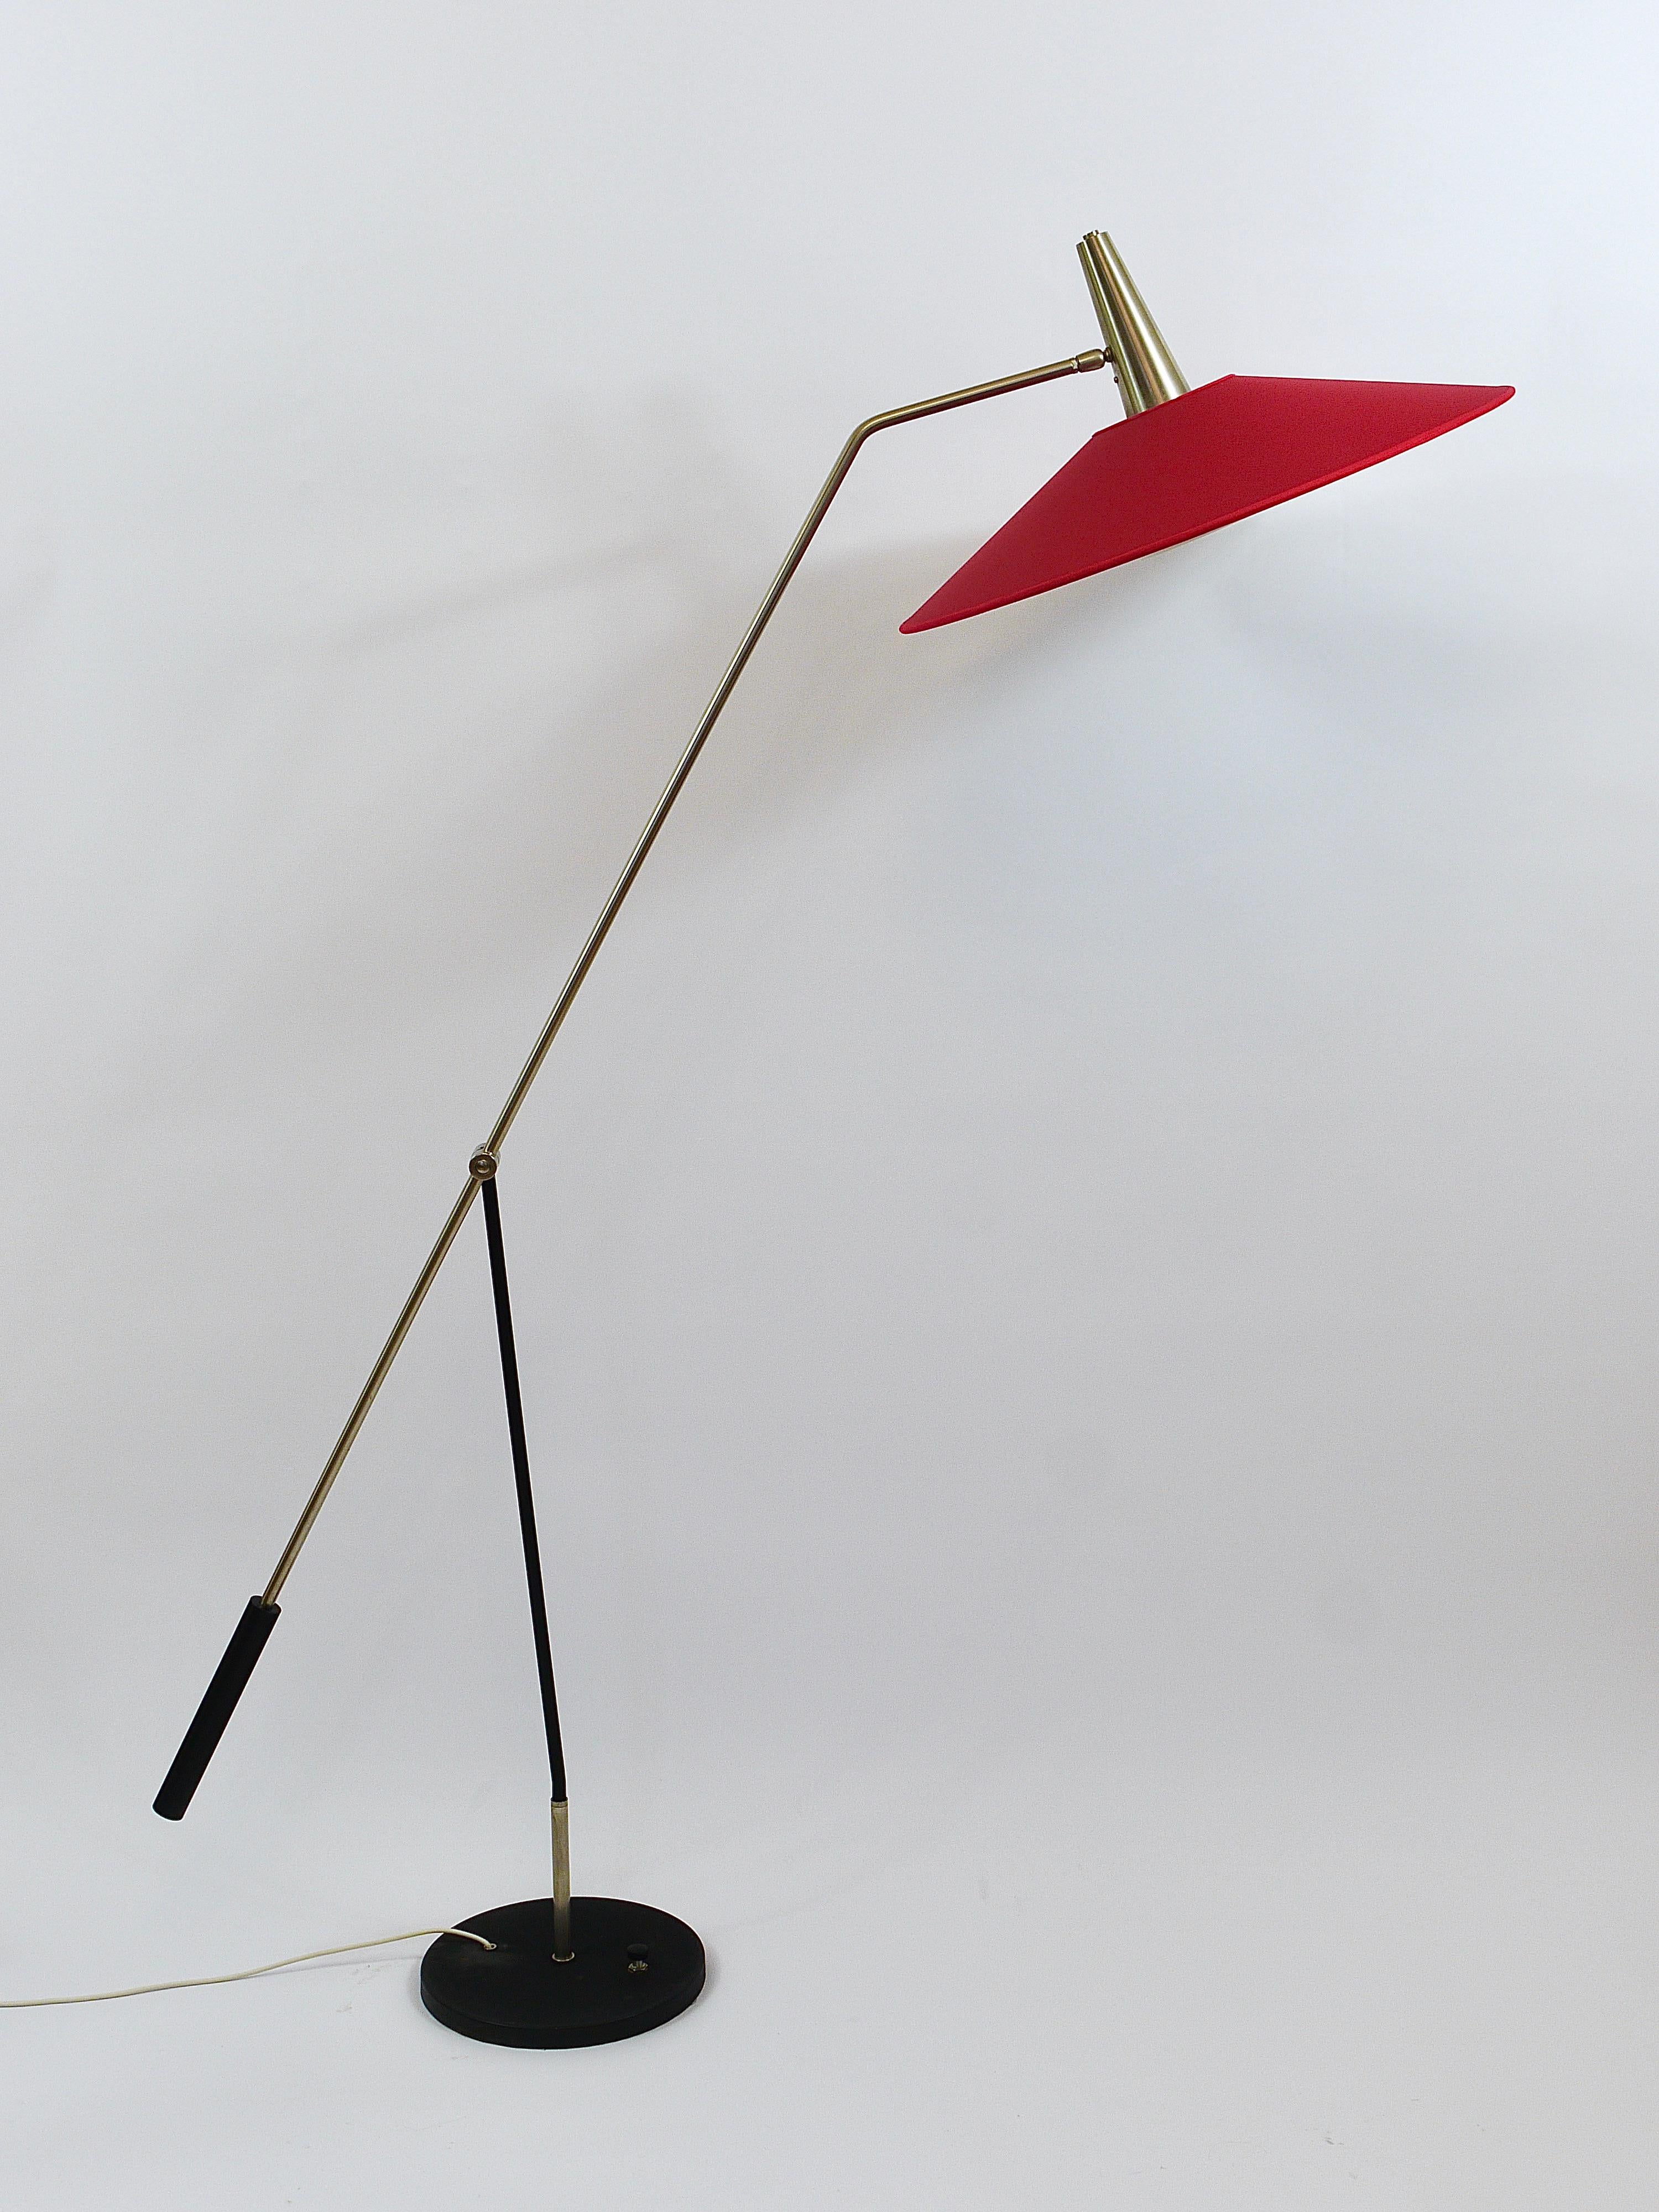 An elegant and beautiful, orientable modernist articulating floorlamp with counterweight from the 1960s, executed by Rupert Nikoll, Austria. Made of brass with a lovely nickel-plated surface and a round black iron swivel base with integrated step